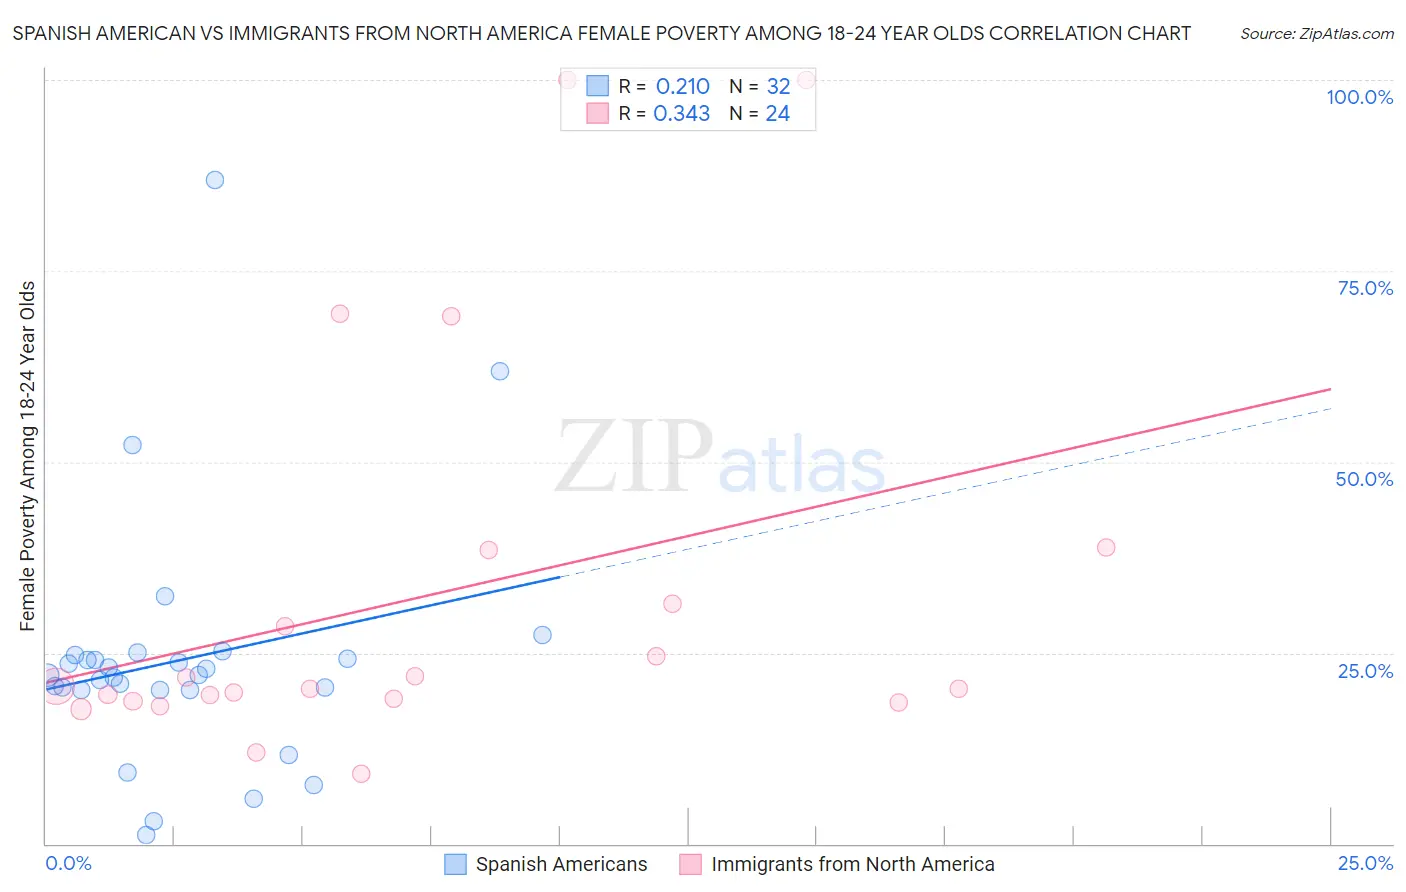 Spanish American vs Immigrants from North America Female Poverty Among 18-24 Year Olds